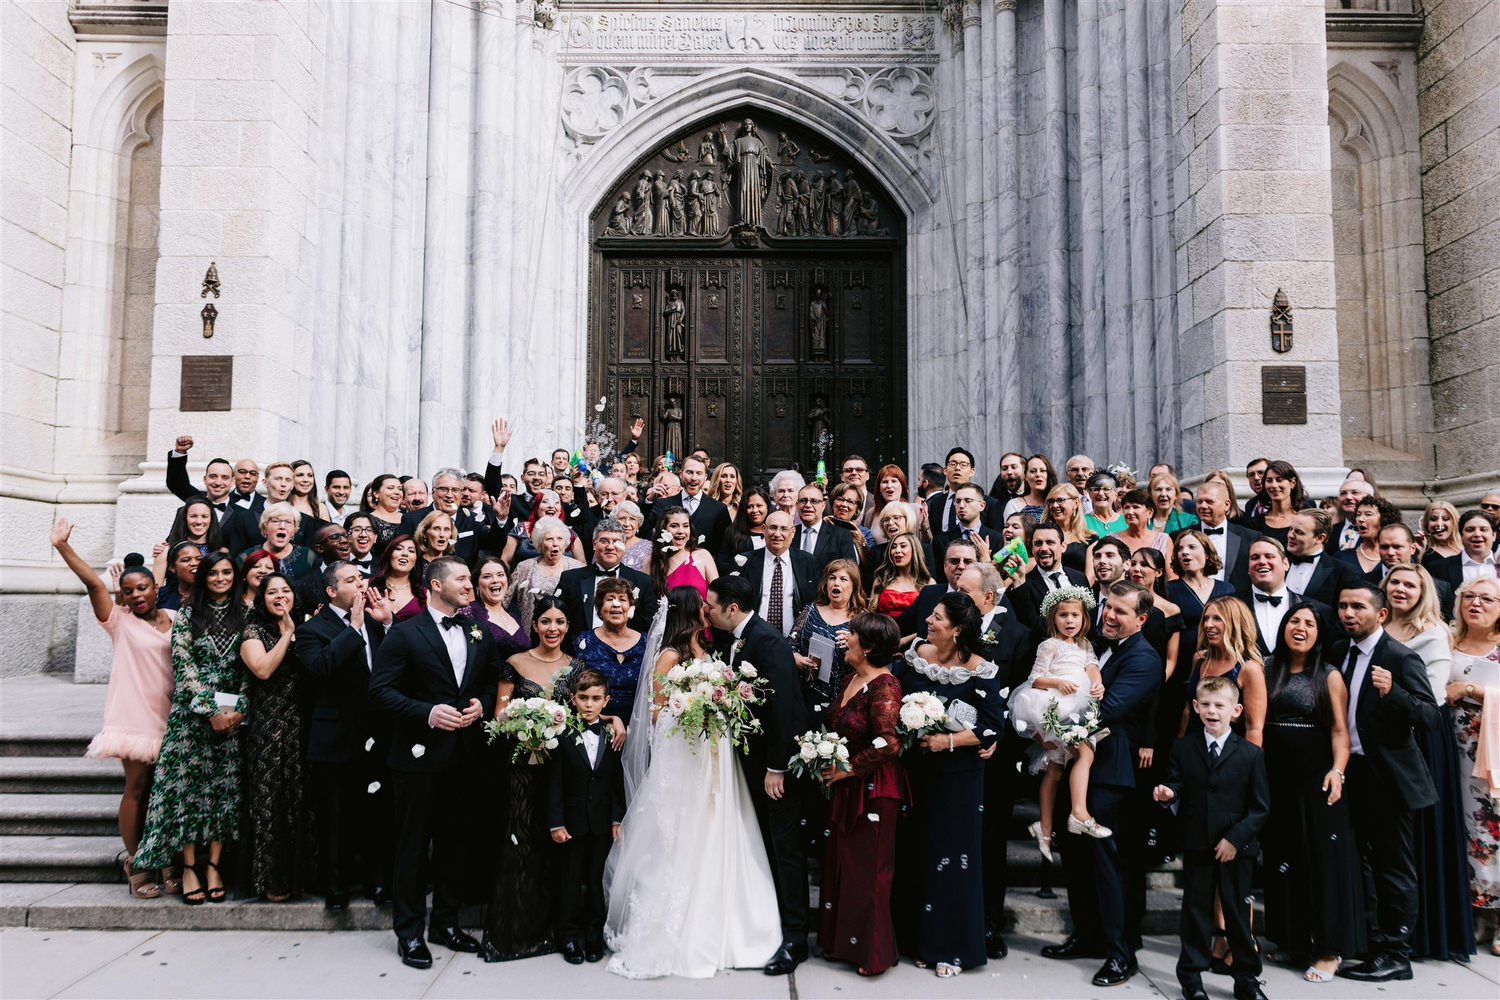 old new york, new york wedding, jenny fu, saint patricks cathedral, large group of wedding guests in front of church, cheering with rose petals, 5th ave, Manhattan